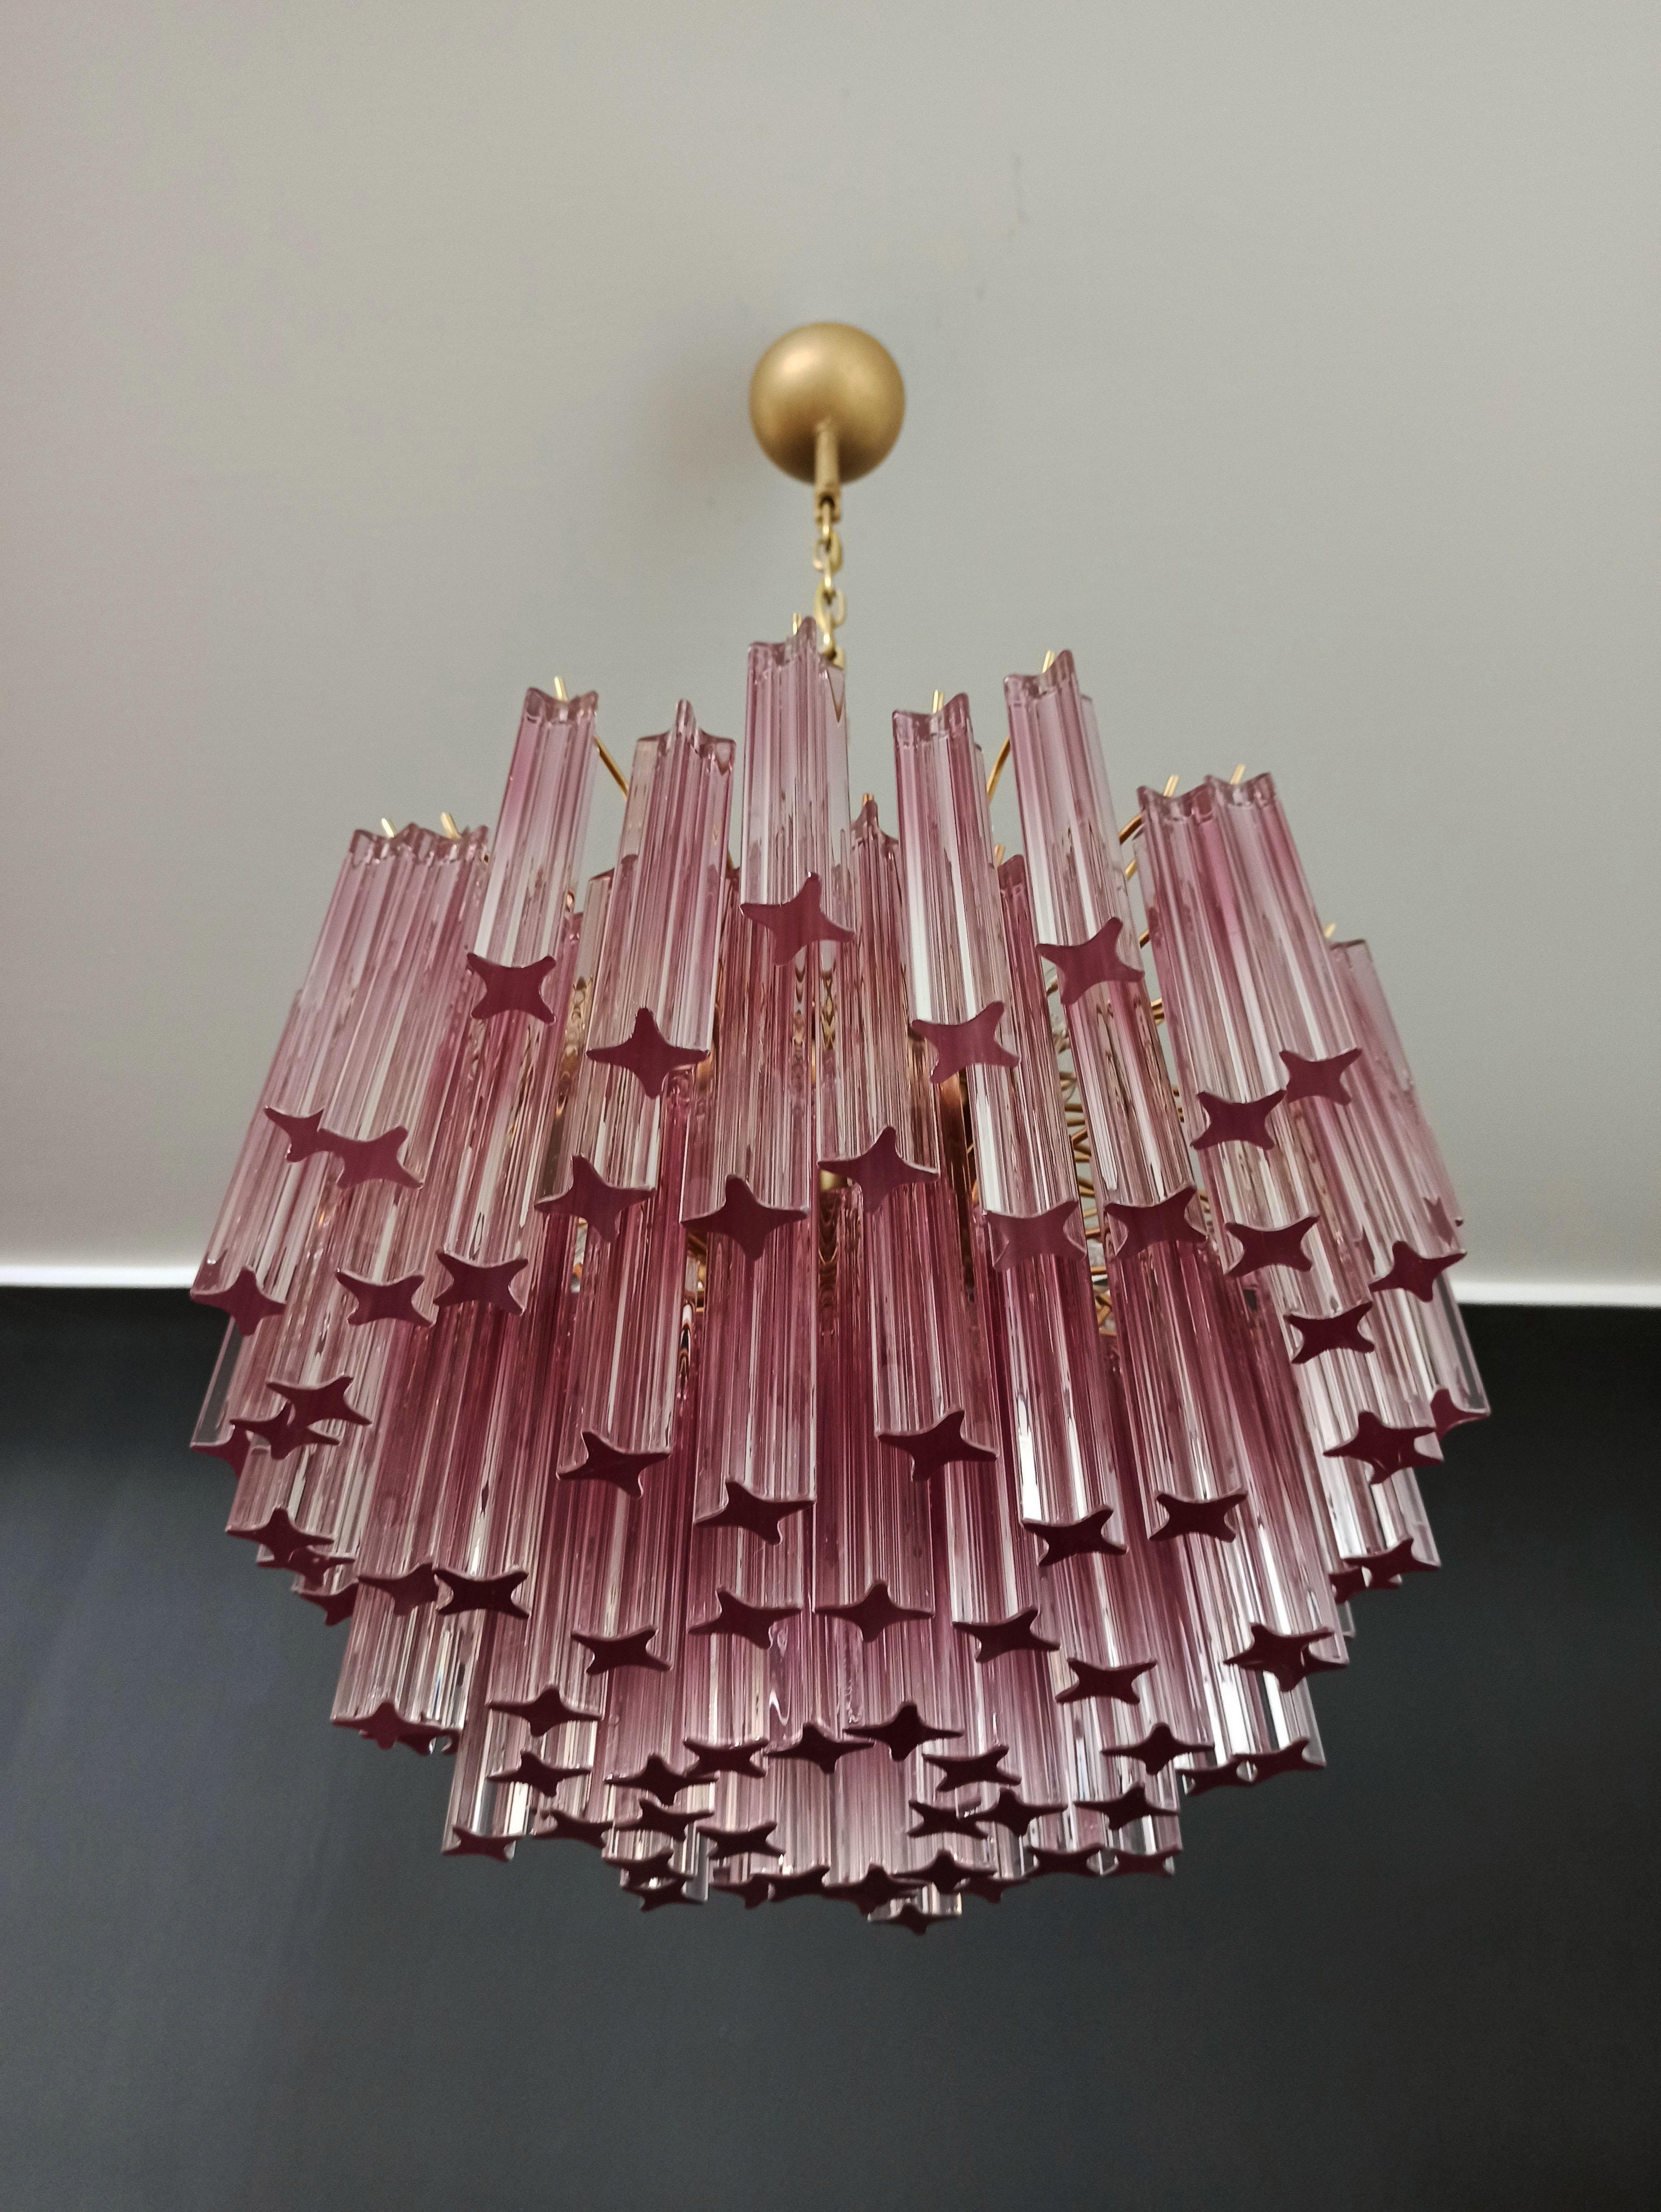 Fantastic vintage Murano chandelier made by 107 Murano crystal prism quadriedri in a painted gold metal frame. The glasses: quadriedri amethyst shade
Period: 1980's
Dimensions: 45.25 inches height (115 cm) with chain; 15.75 inches height (40 cm)